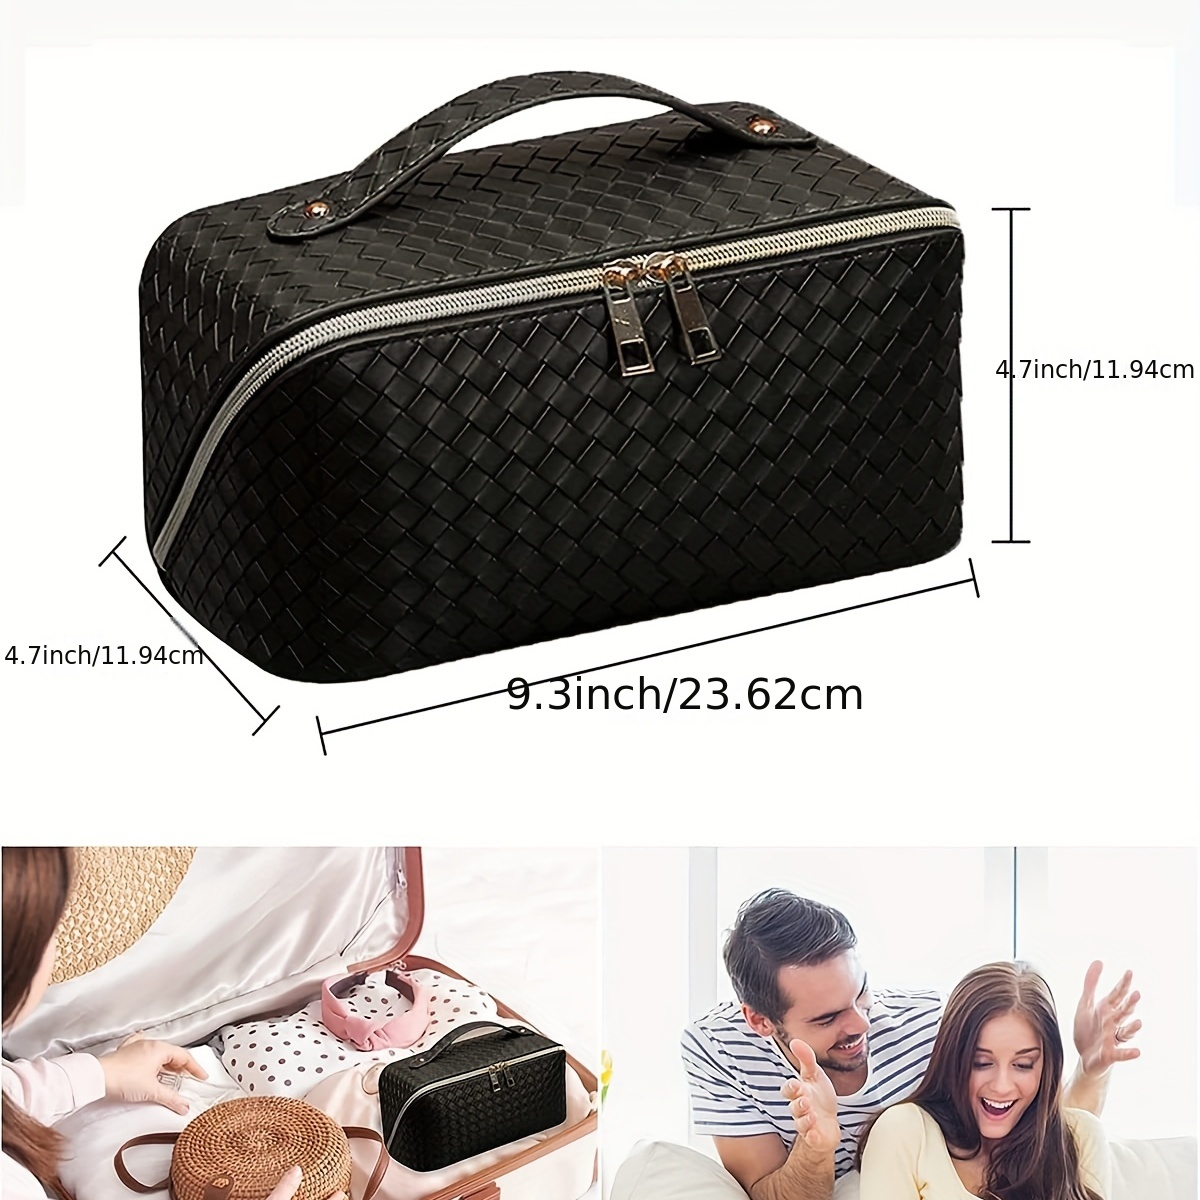  Travel Makeup Bag for Women Large Capacity Cosmetic Bag  Waterproof Black Checkered Portable PU Leather Toiletry Bag Organizer  Makeup Brushes Storage Bag with Dividers and Handle : Beauty & Personal